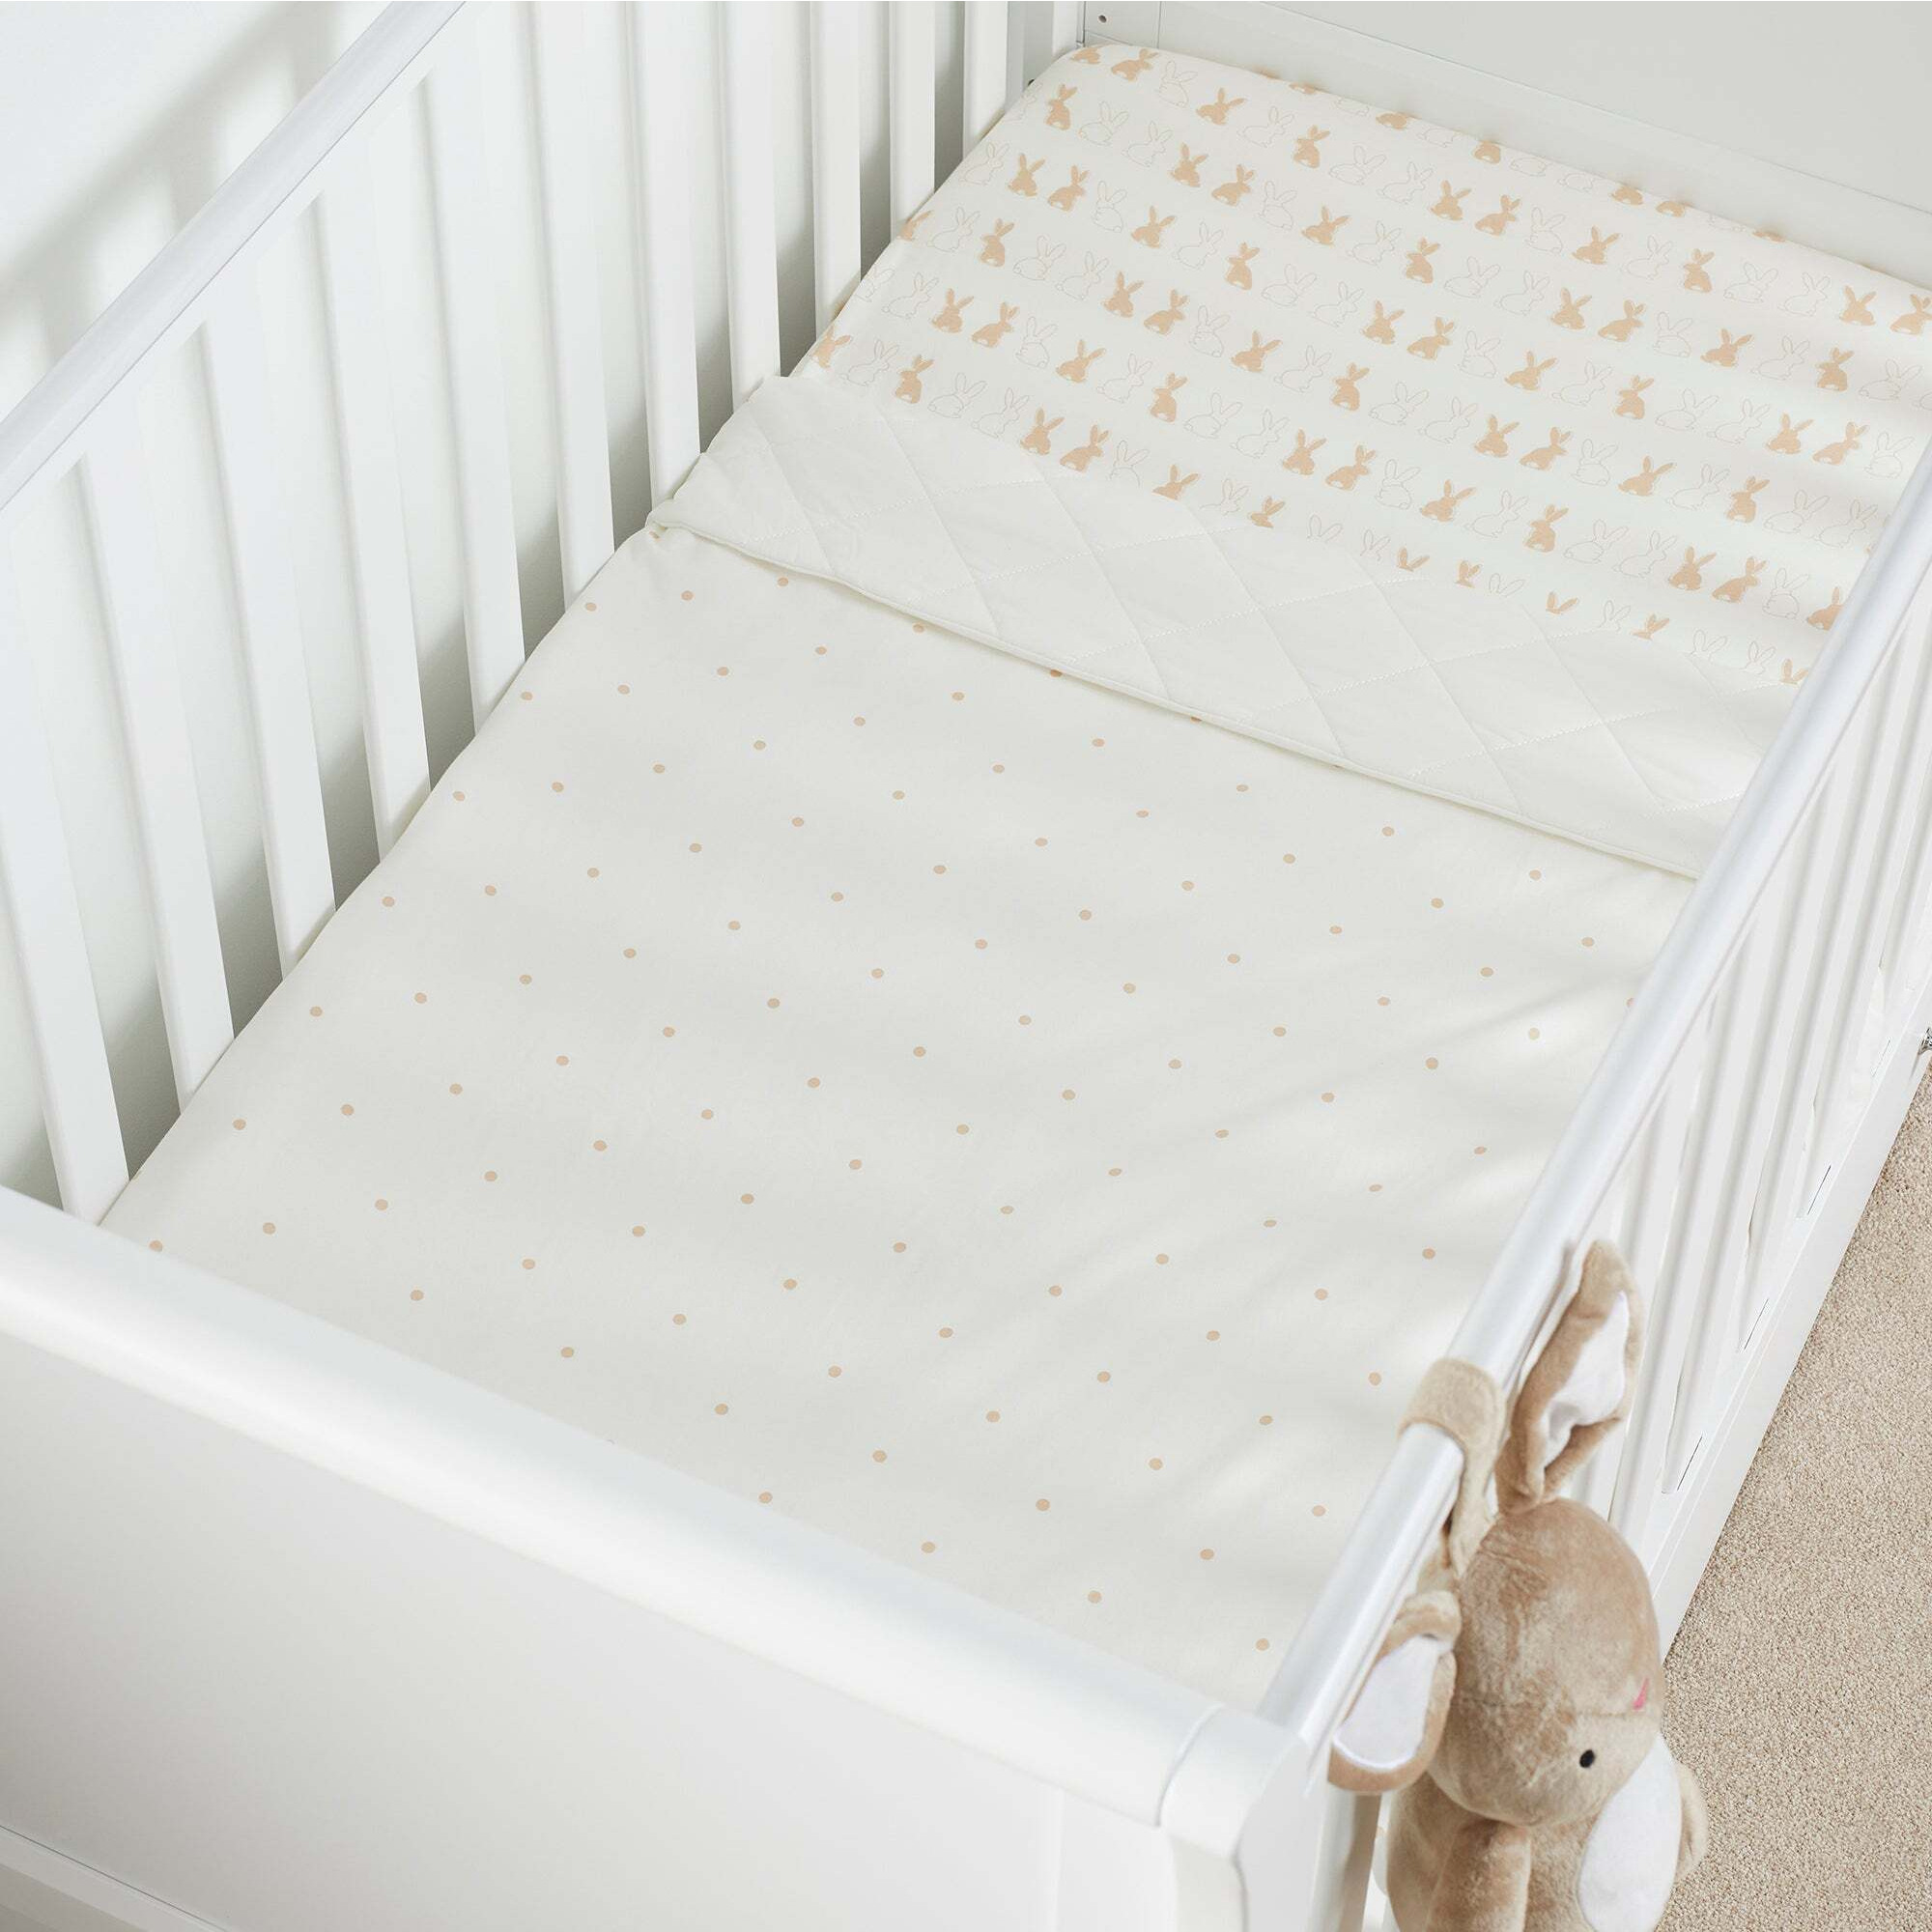 Bunnychino 2.5 Tog Cot Quilt White/Brown